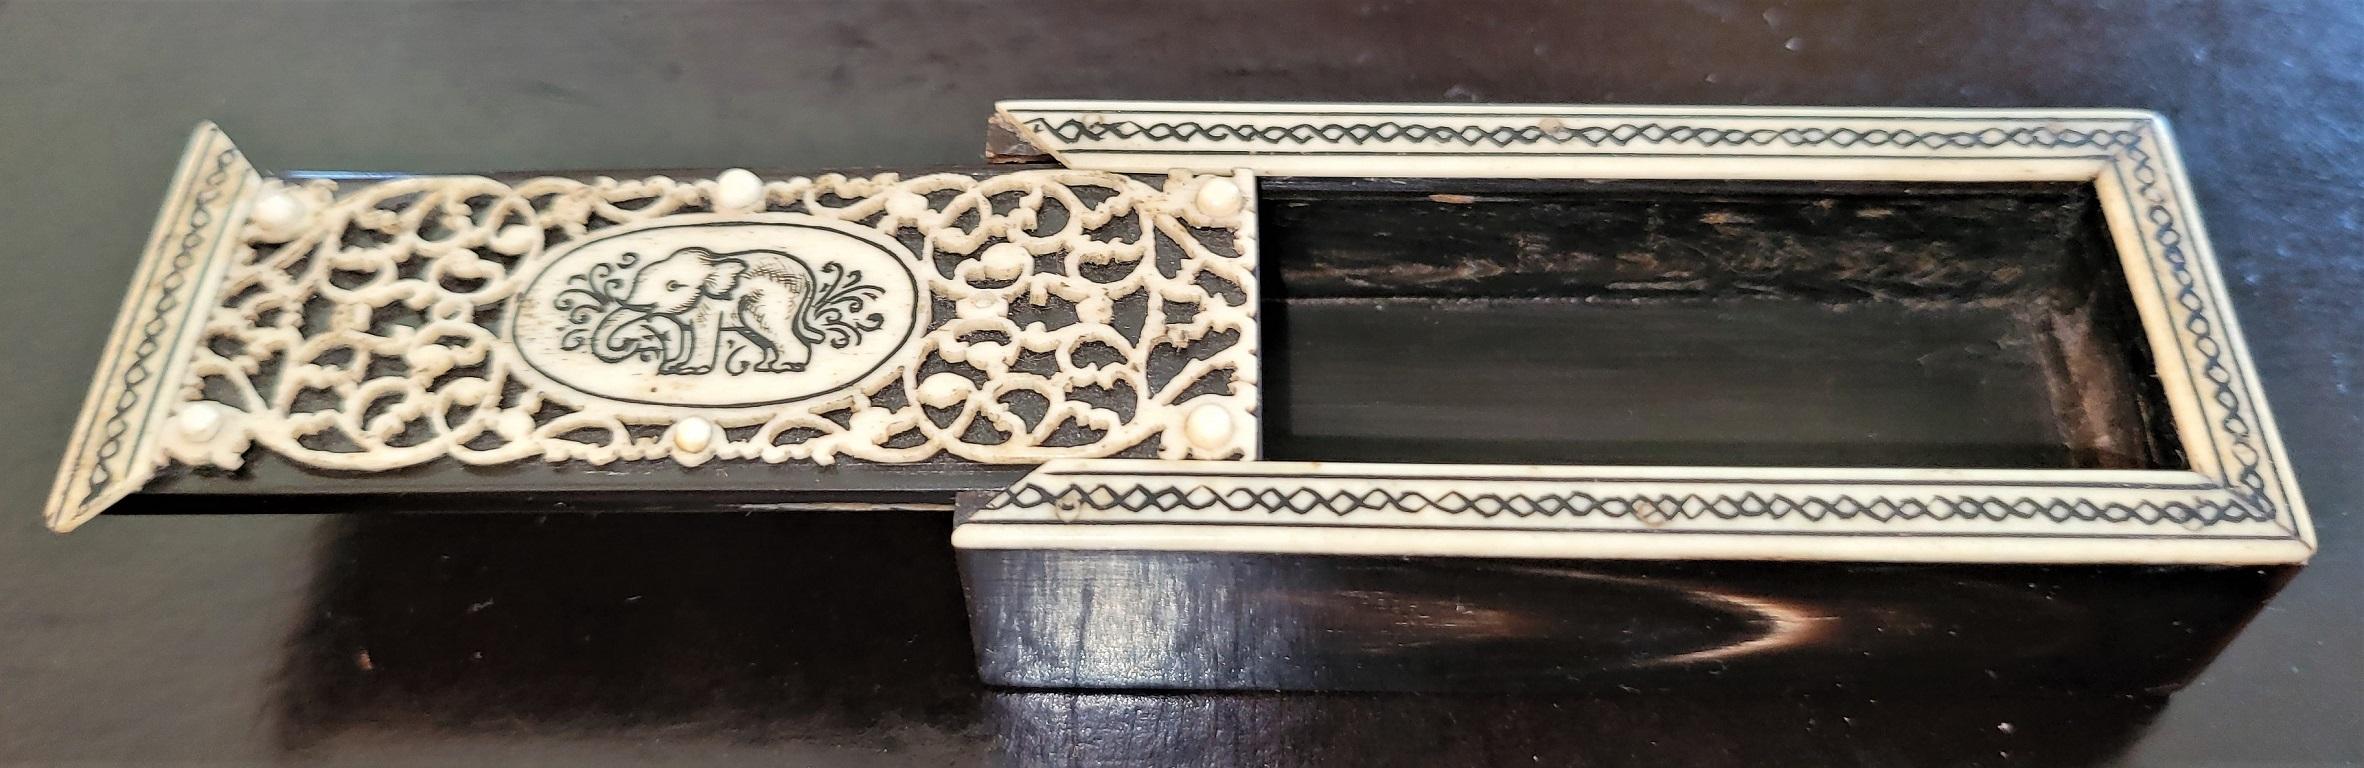 19C Anglo Indian Vizigapatam Stamp Box For Sale 4